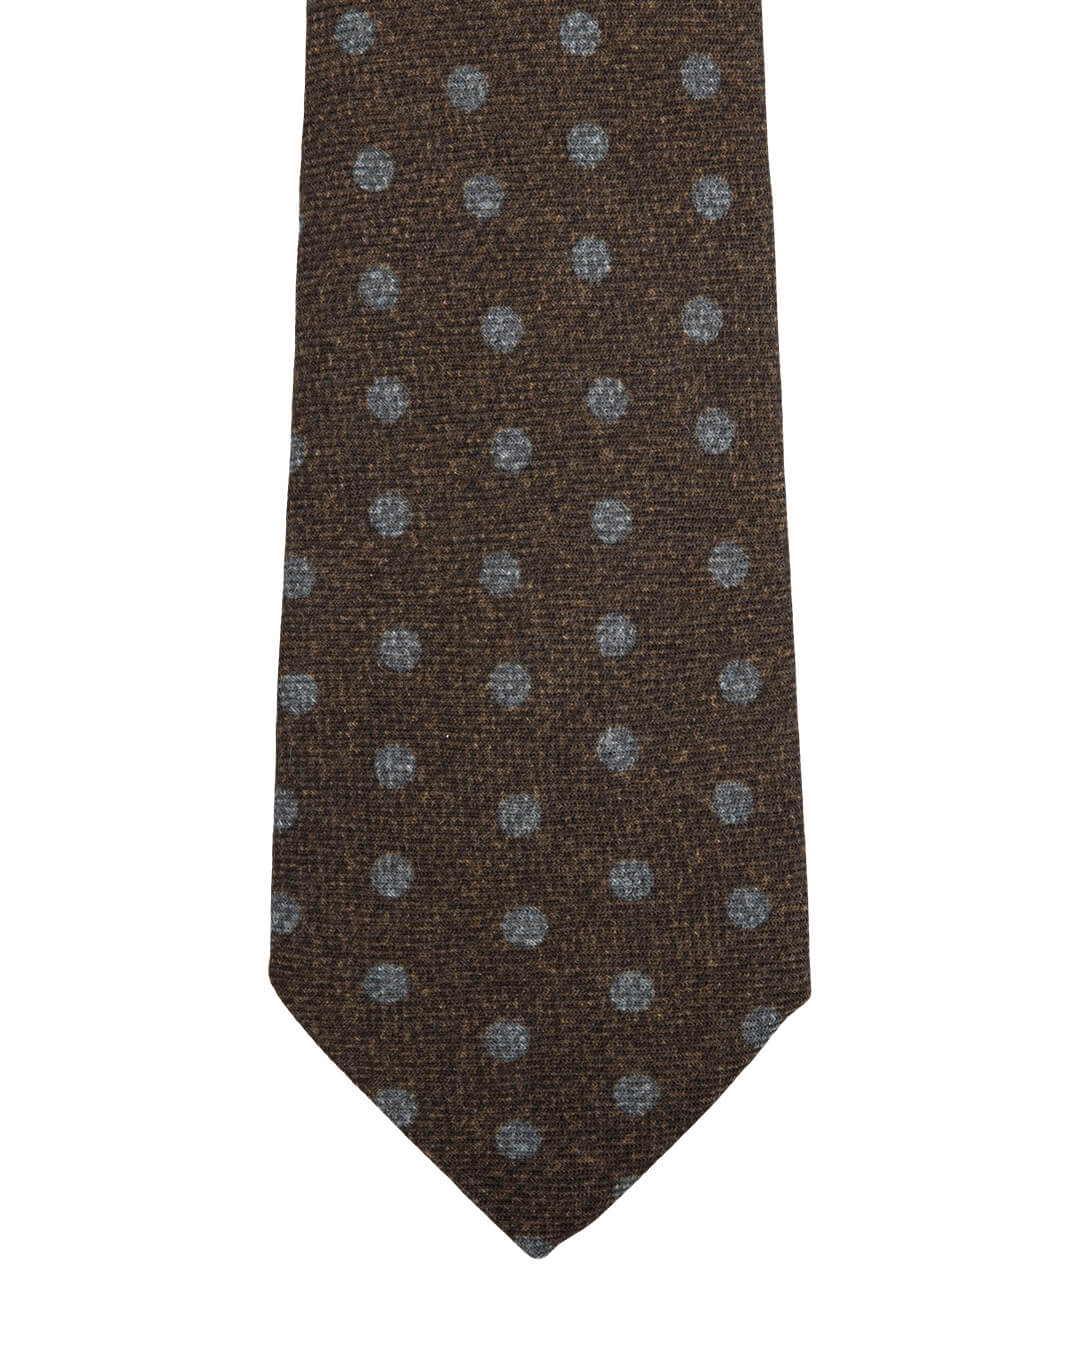 Tie Brown With Grey Spots